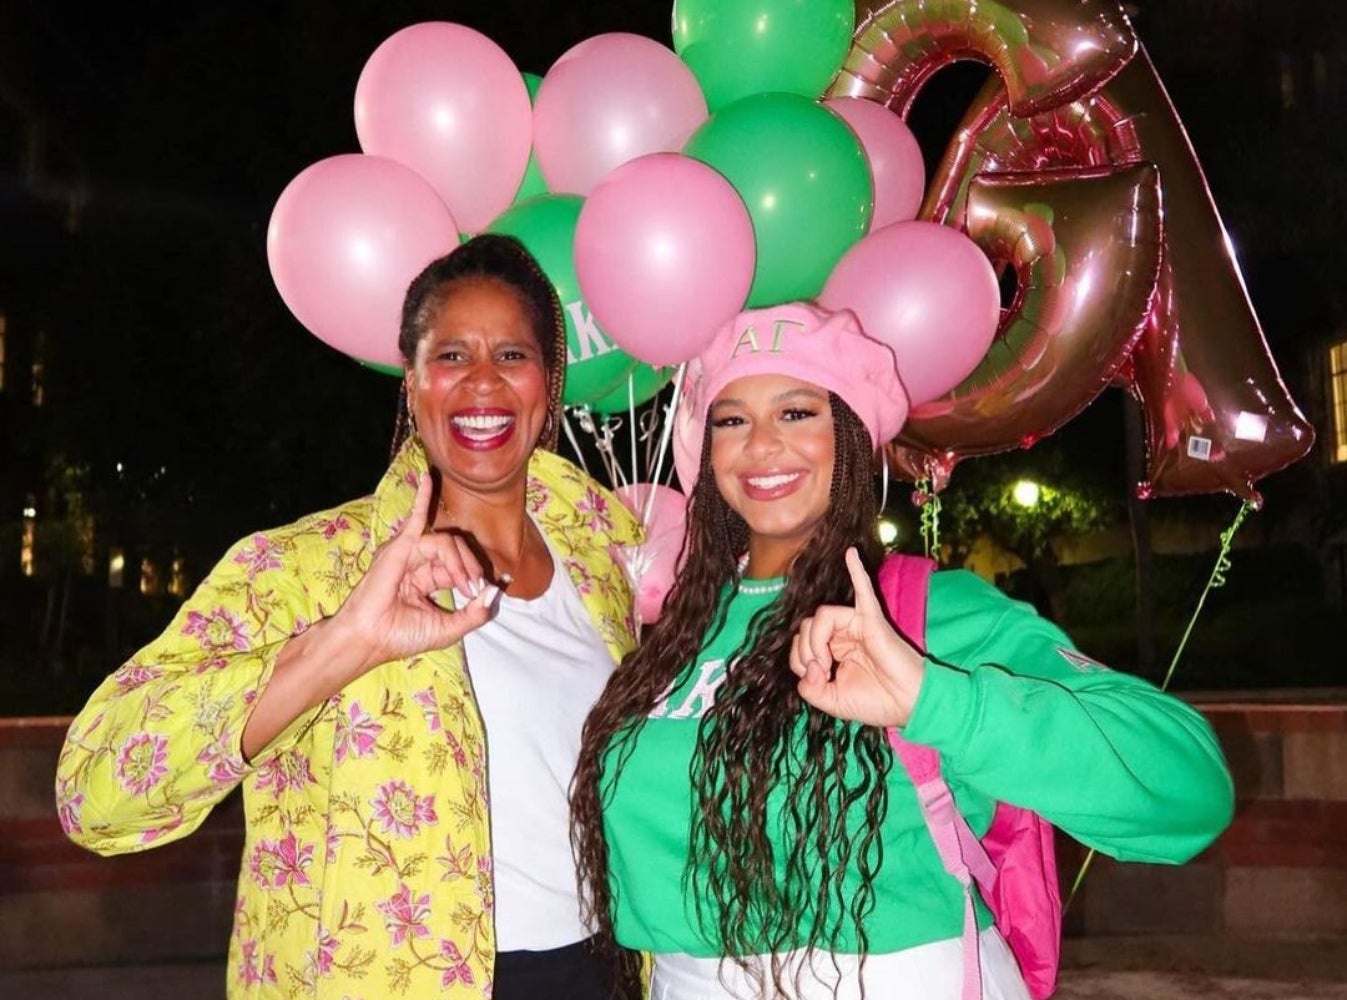 Former Dance Moms Star Nia Sioux Becomes An AKA Just Like Her Mom